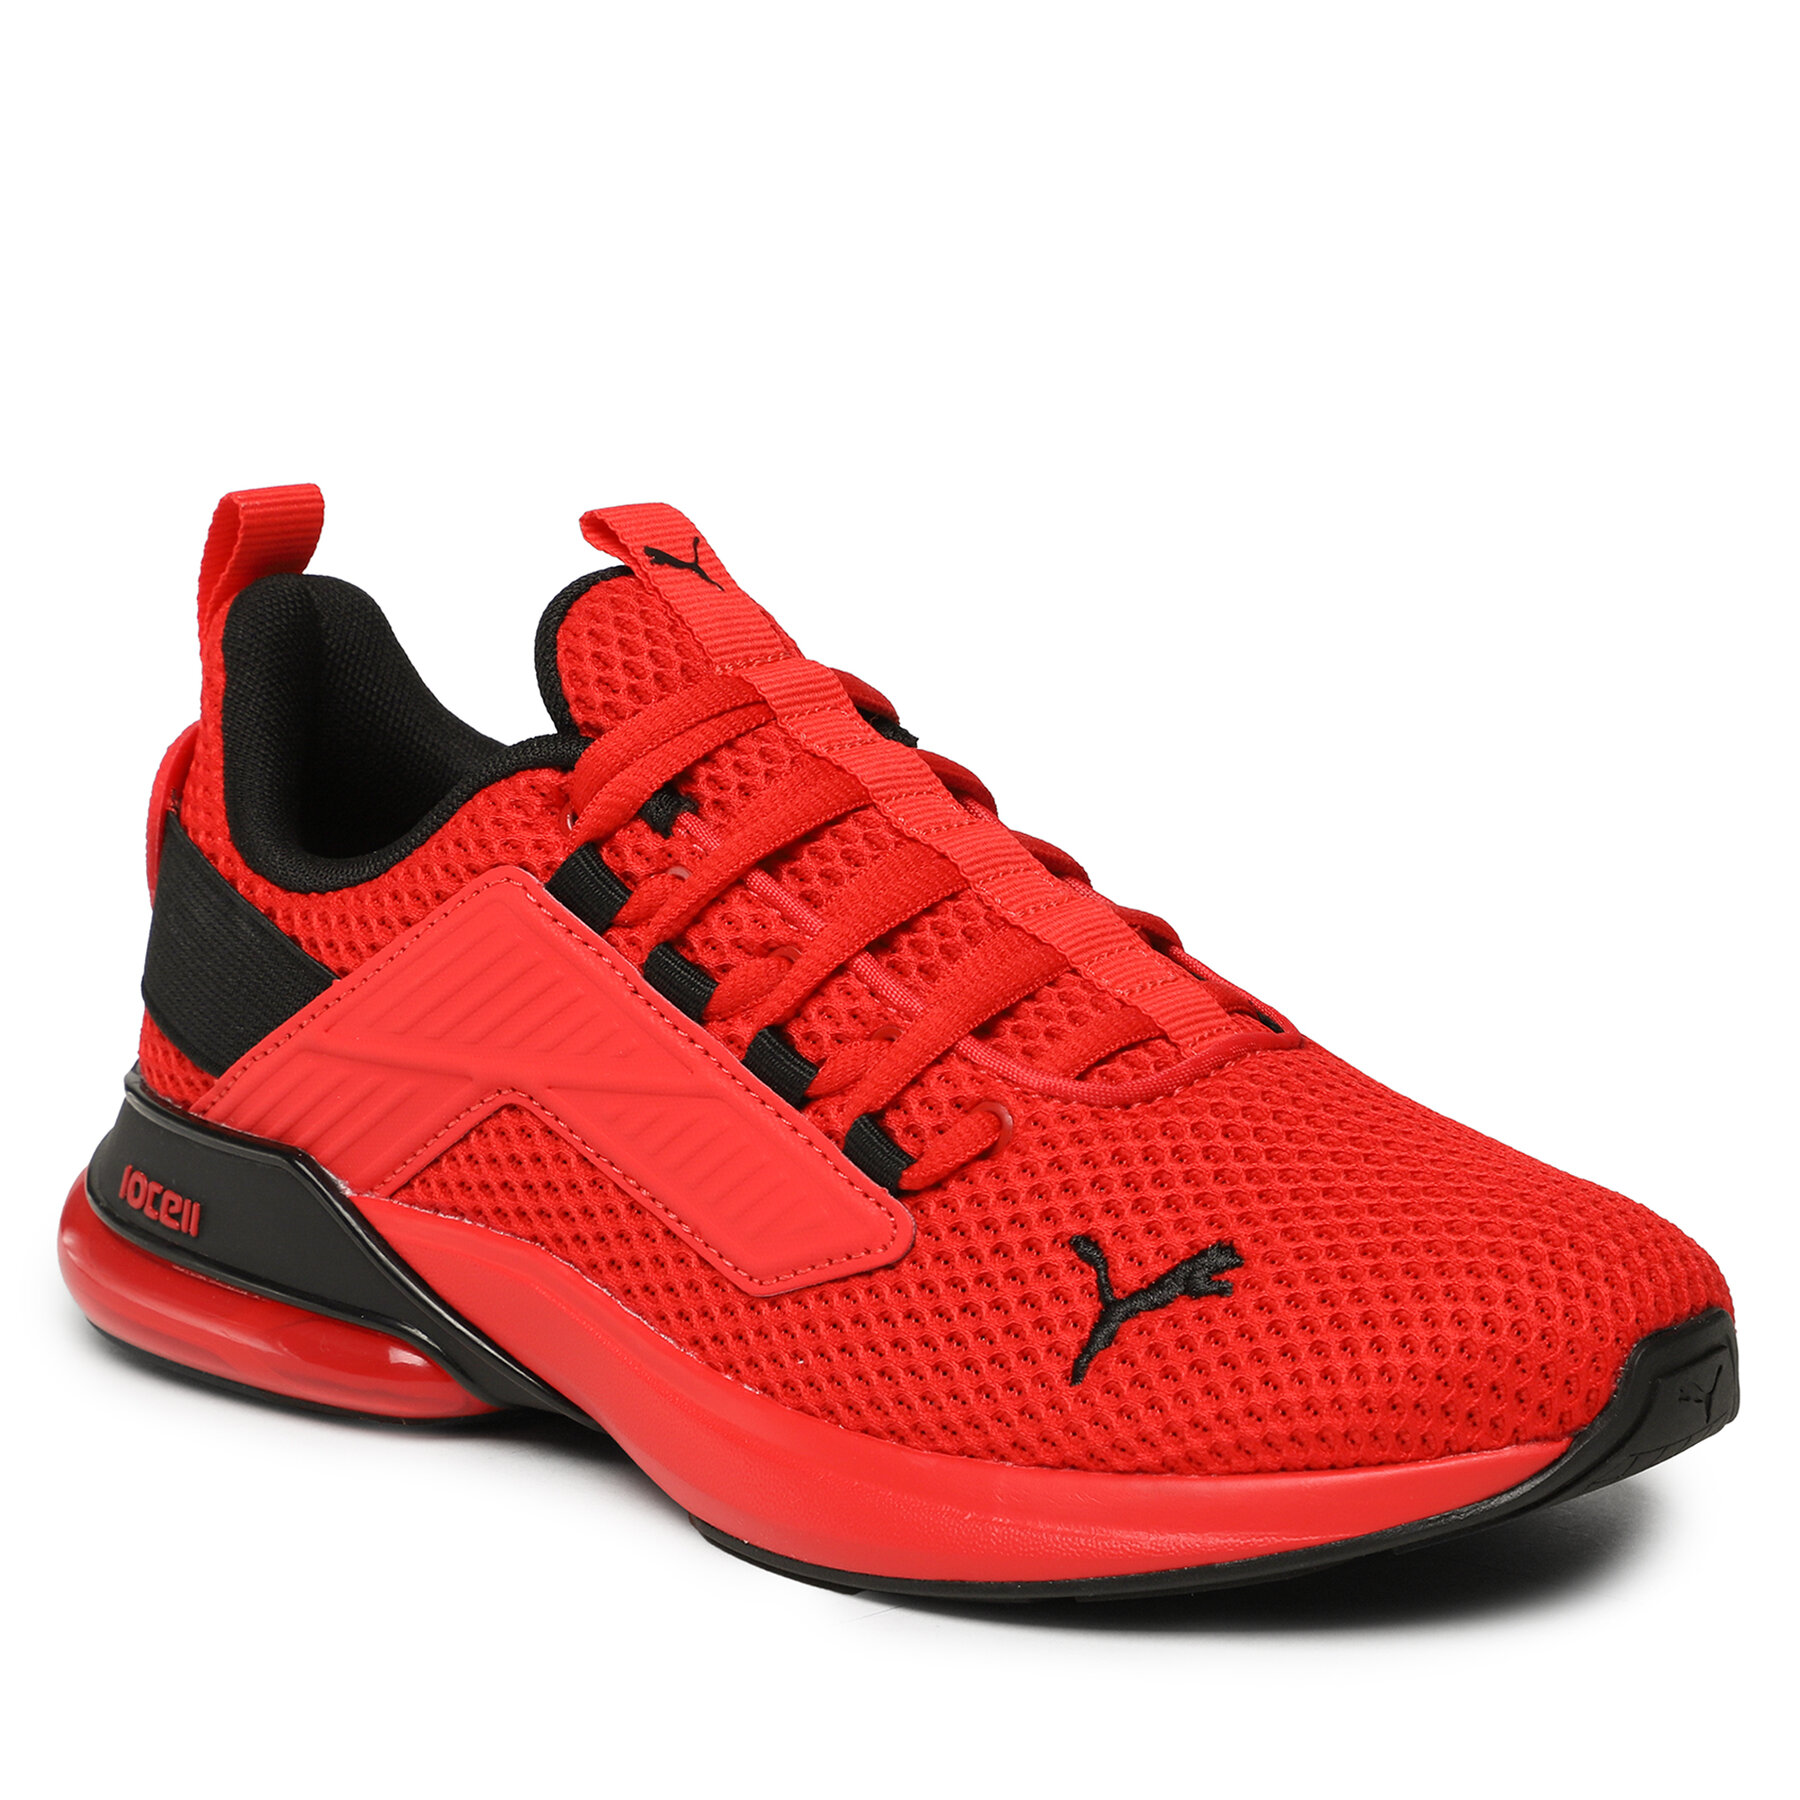 Skor Puma Cell Rapid For All Time 377871 05 Red